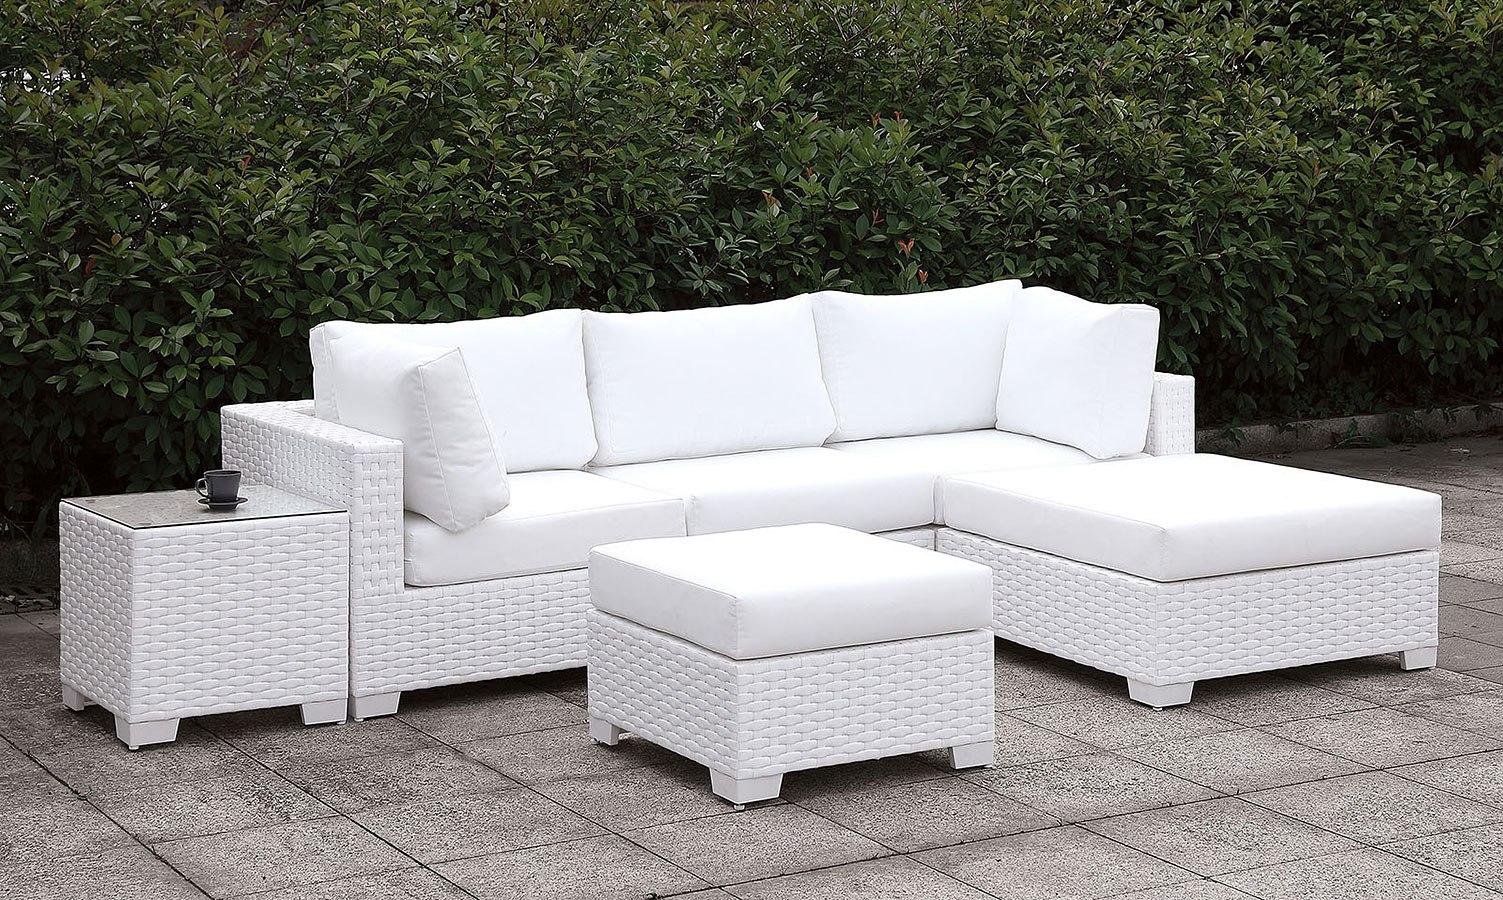 Contemporary Outdoor Sectional Set CM-OS2128WH-SET14 Somani CM-OS2128WH-SET14 in White Wicker